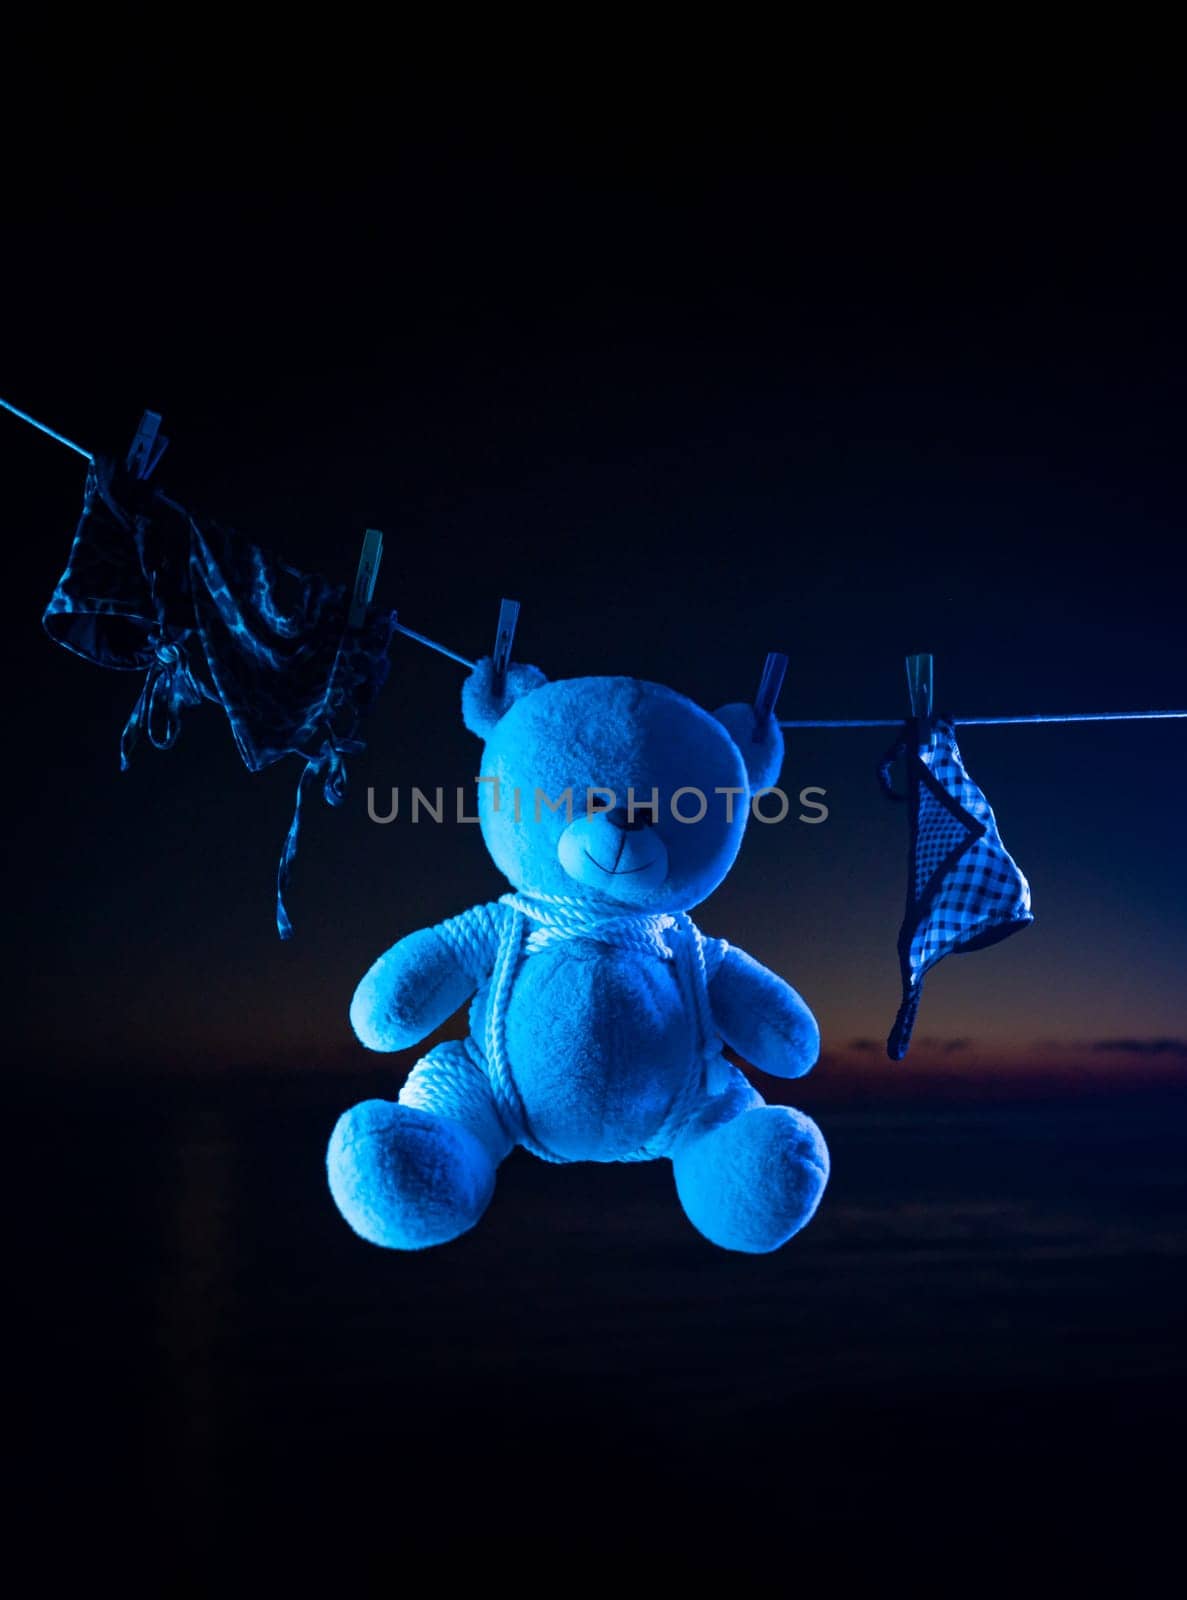 teddy bear toy hangs on a clothesline on clothespins in neon light. tied with shibari ropes